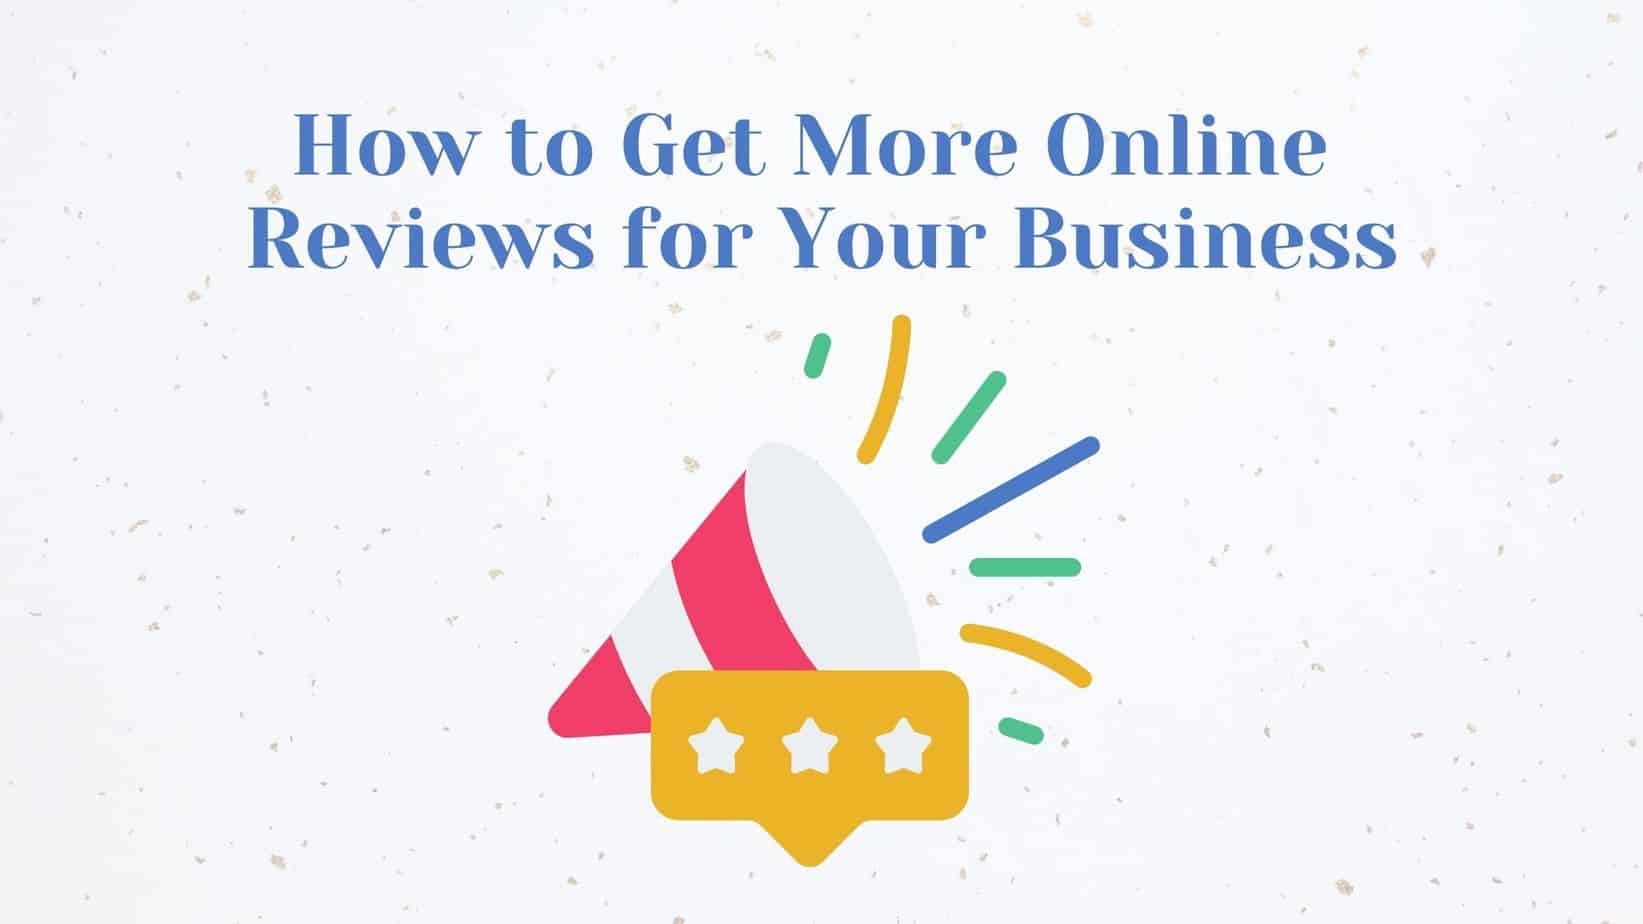 Featured image for “How to Get More Online Reviews for Your Business”